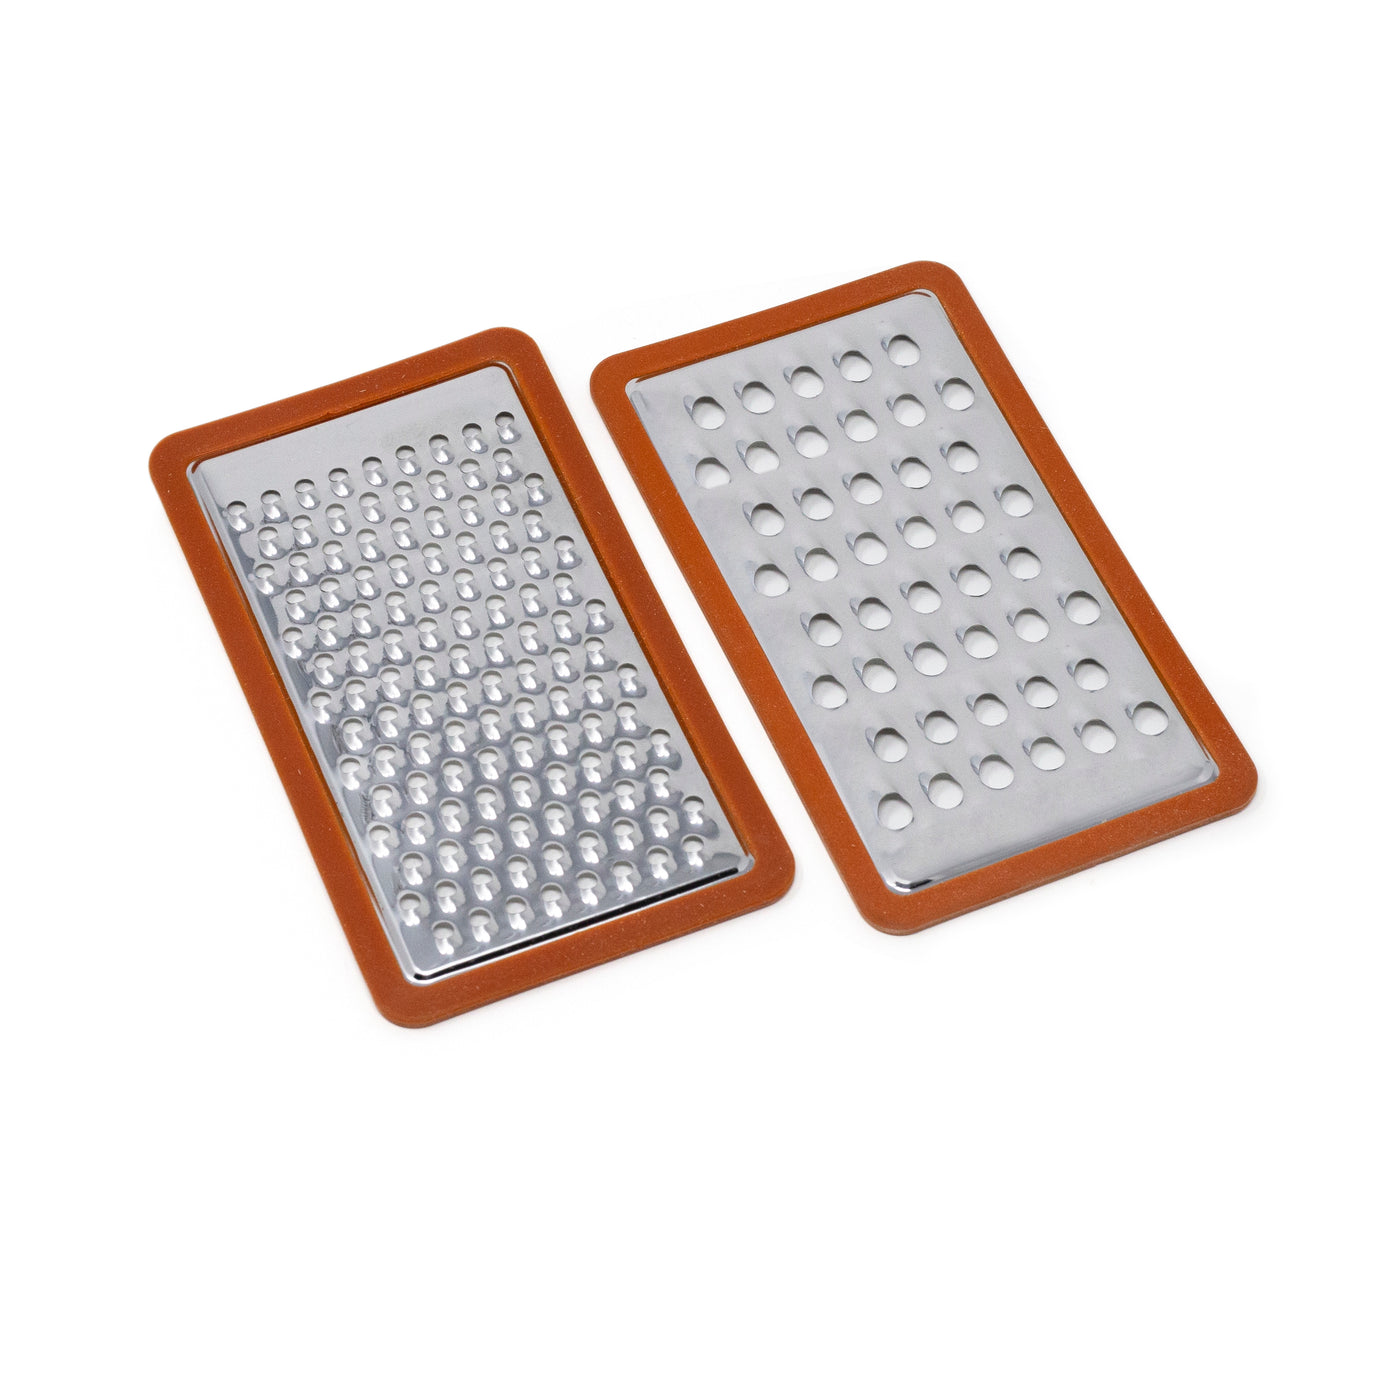 Stainless Steel Graters or Shredders, 2 Pack for 4 Tray Bamboo Cutting Board